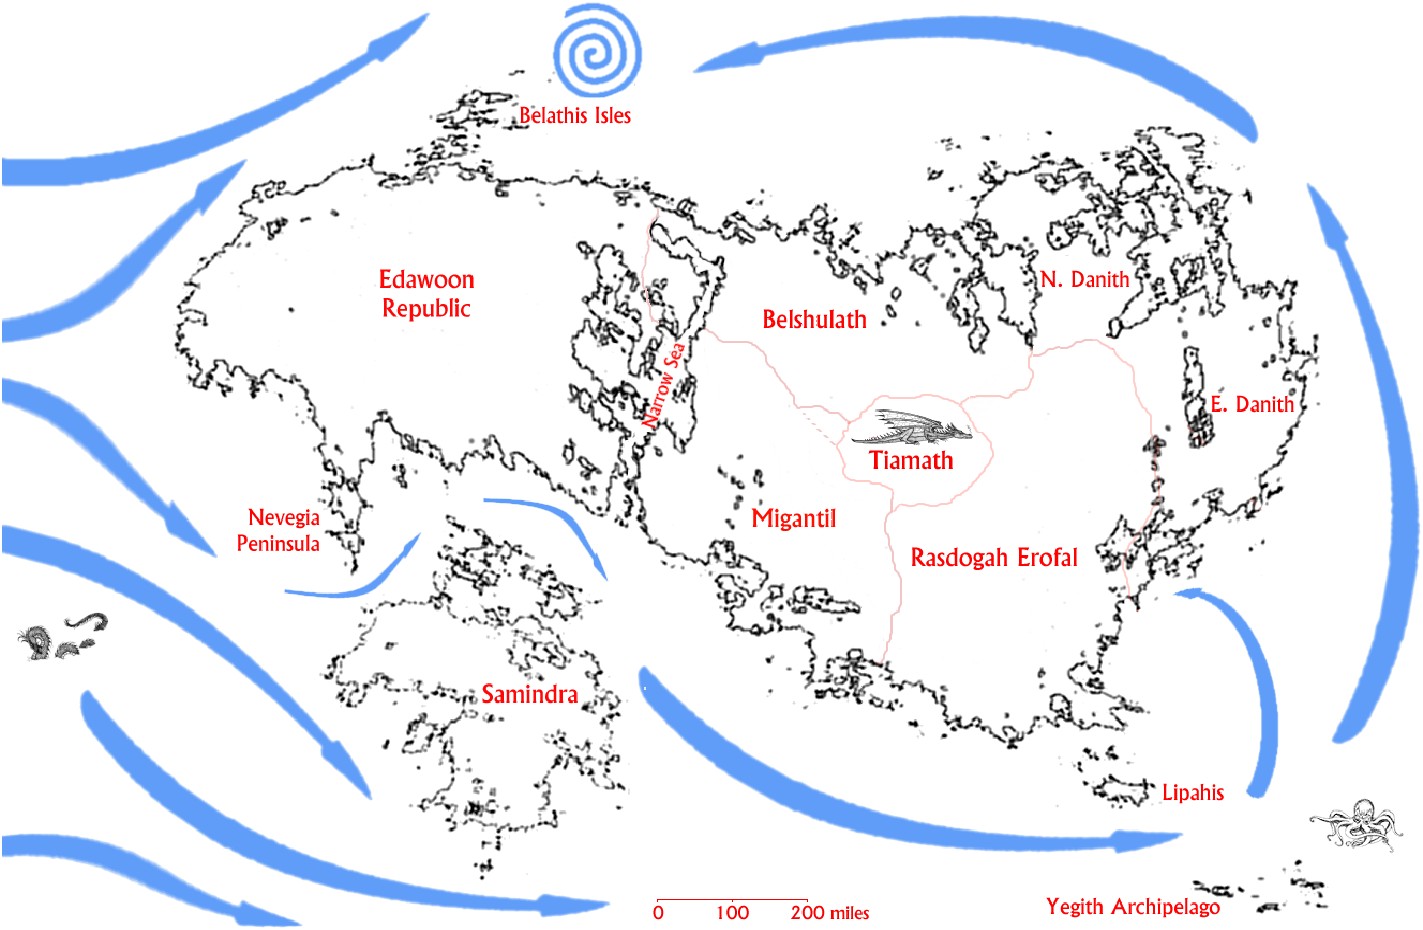 Link to large map of ocean currents